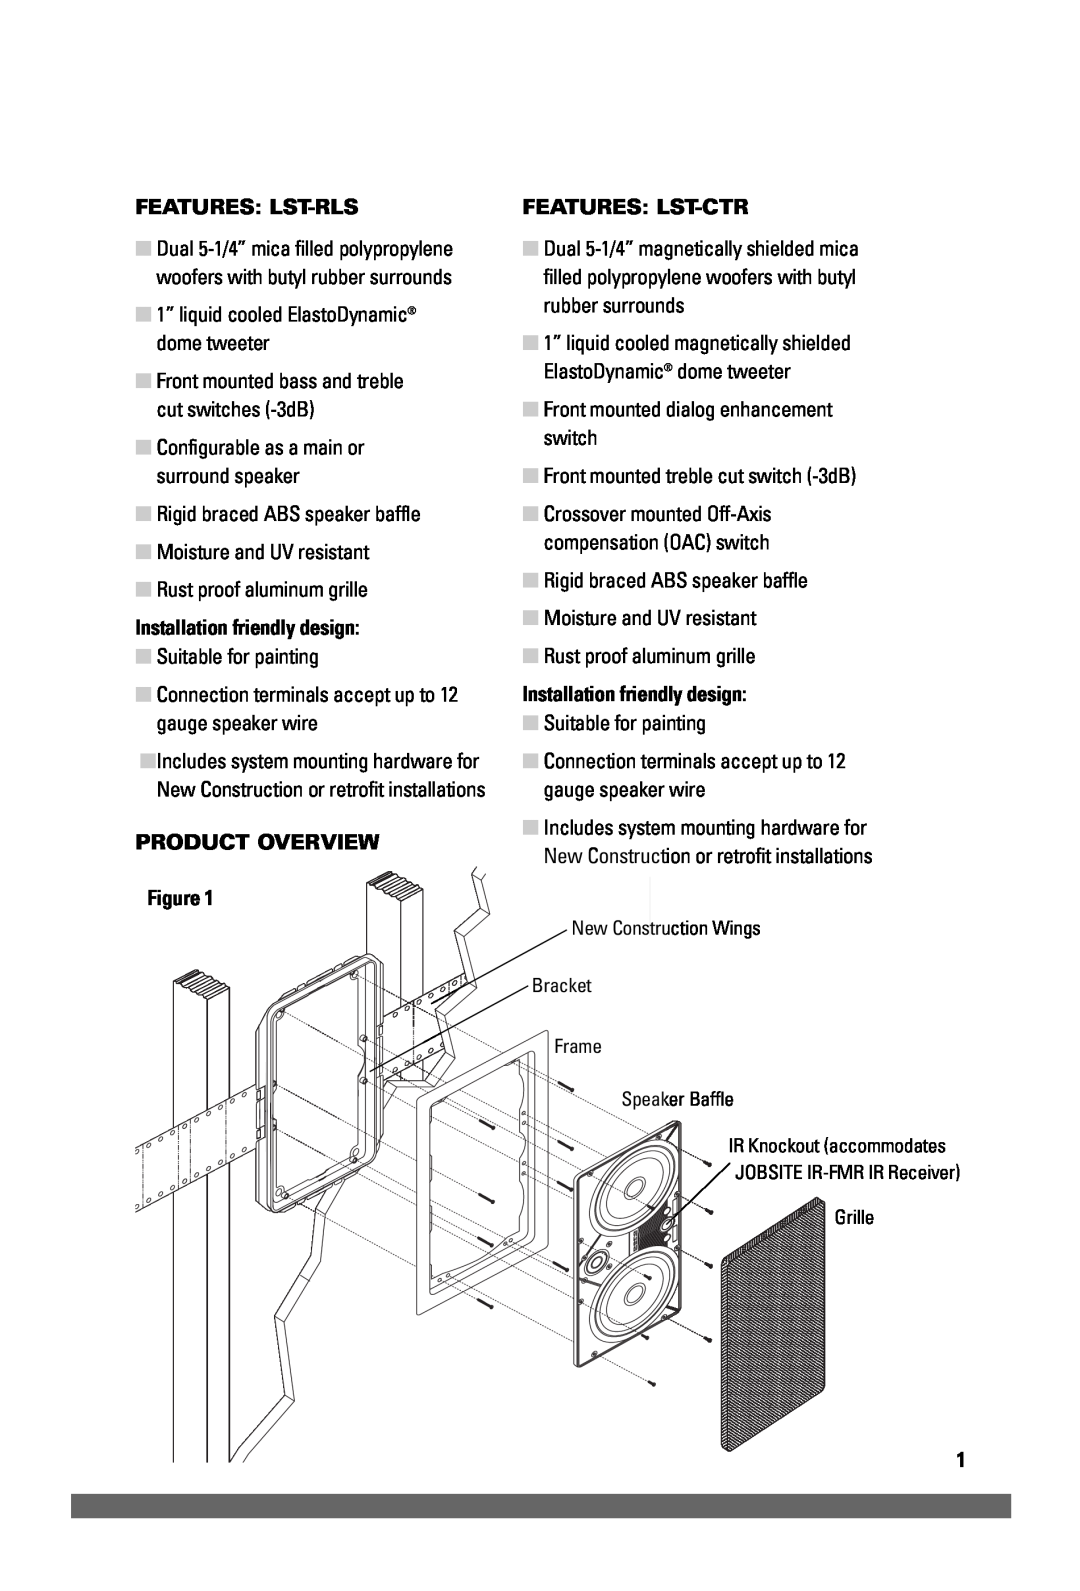 JobSite Systems LST-CTR, LST-RLS Features Lst-Rls, Installation friendly design, PRODUCT OVERVIEW Figure, Features Lst-Ctr 